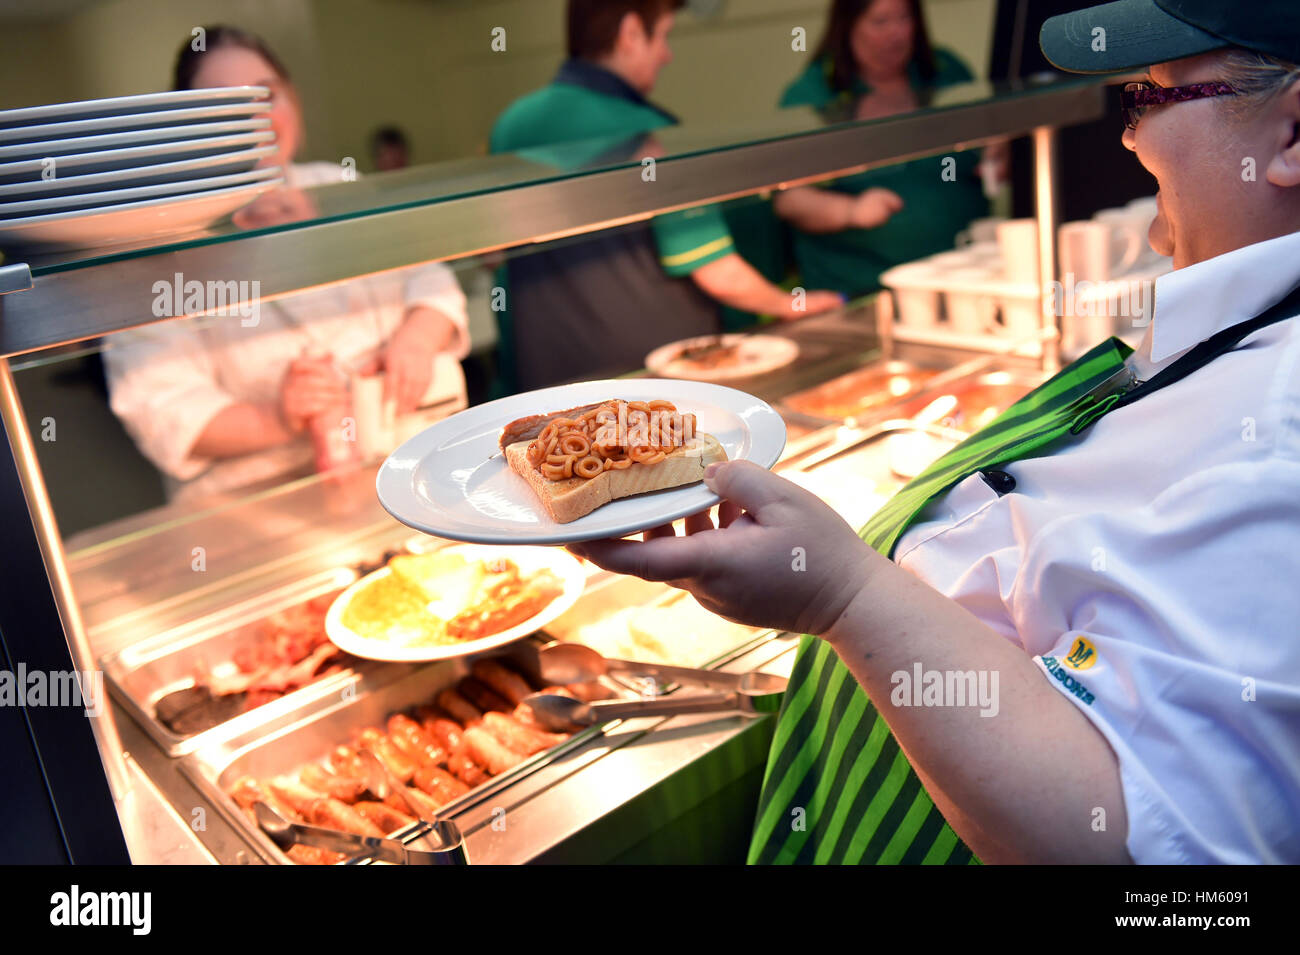 Office Staff Canteen High Resolution Stock Photography and Images - Alamy